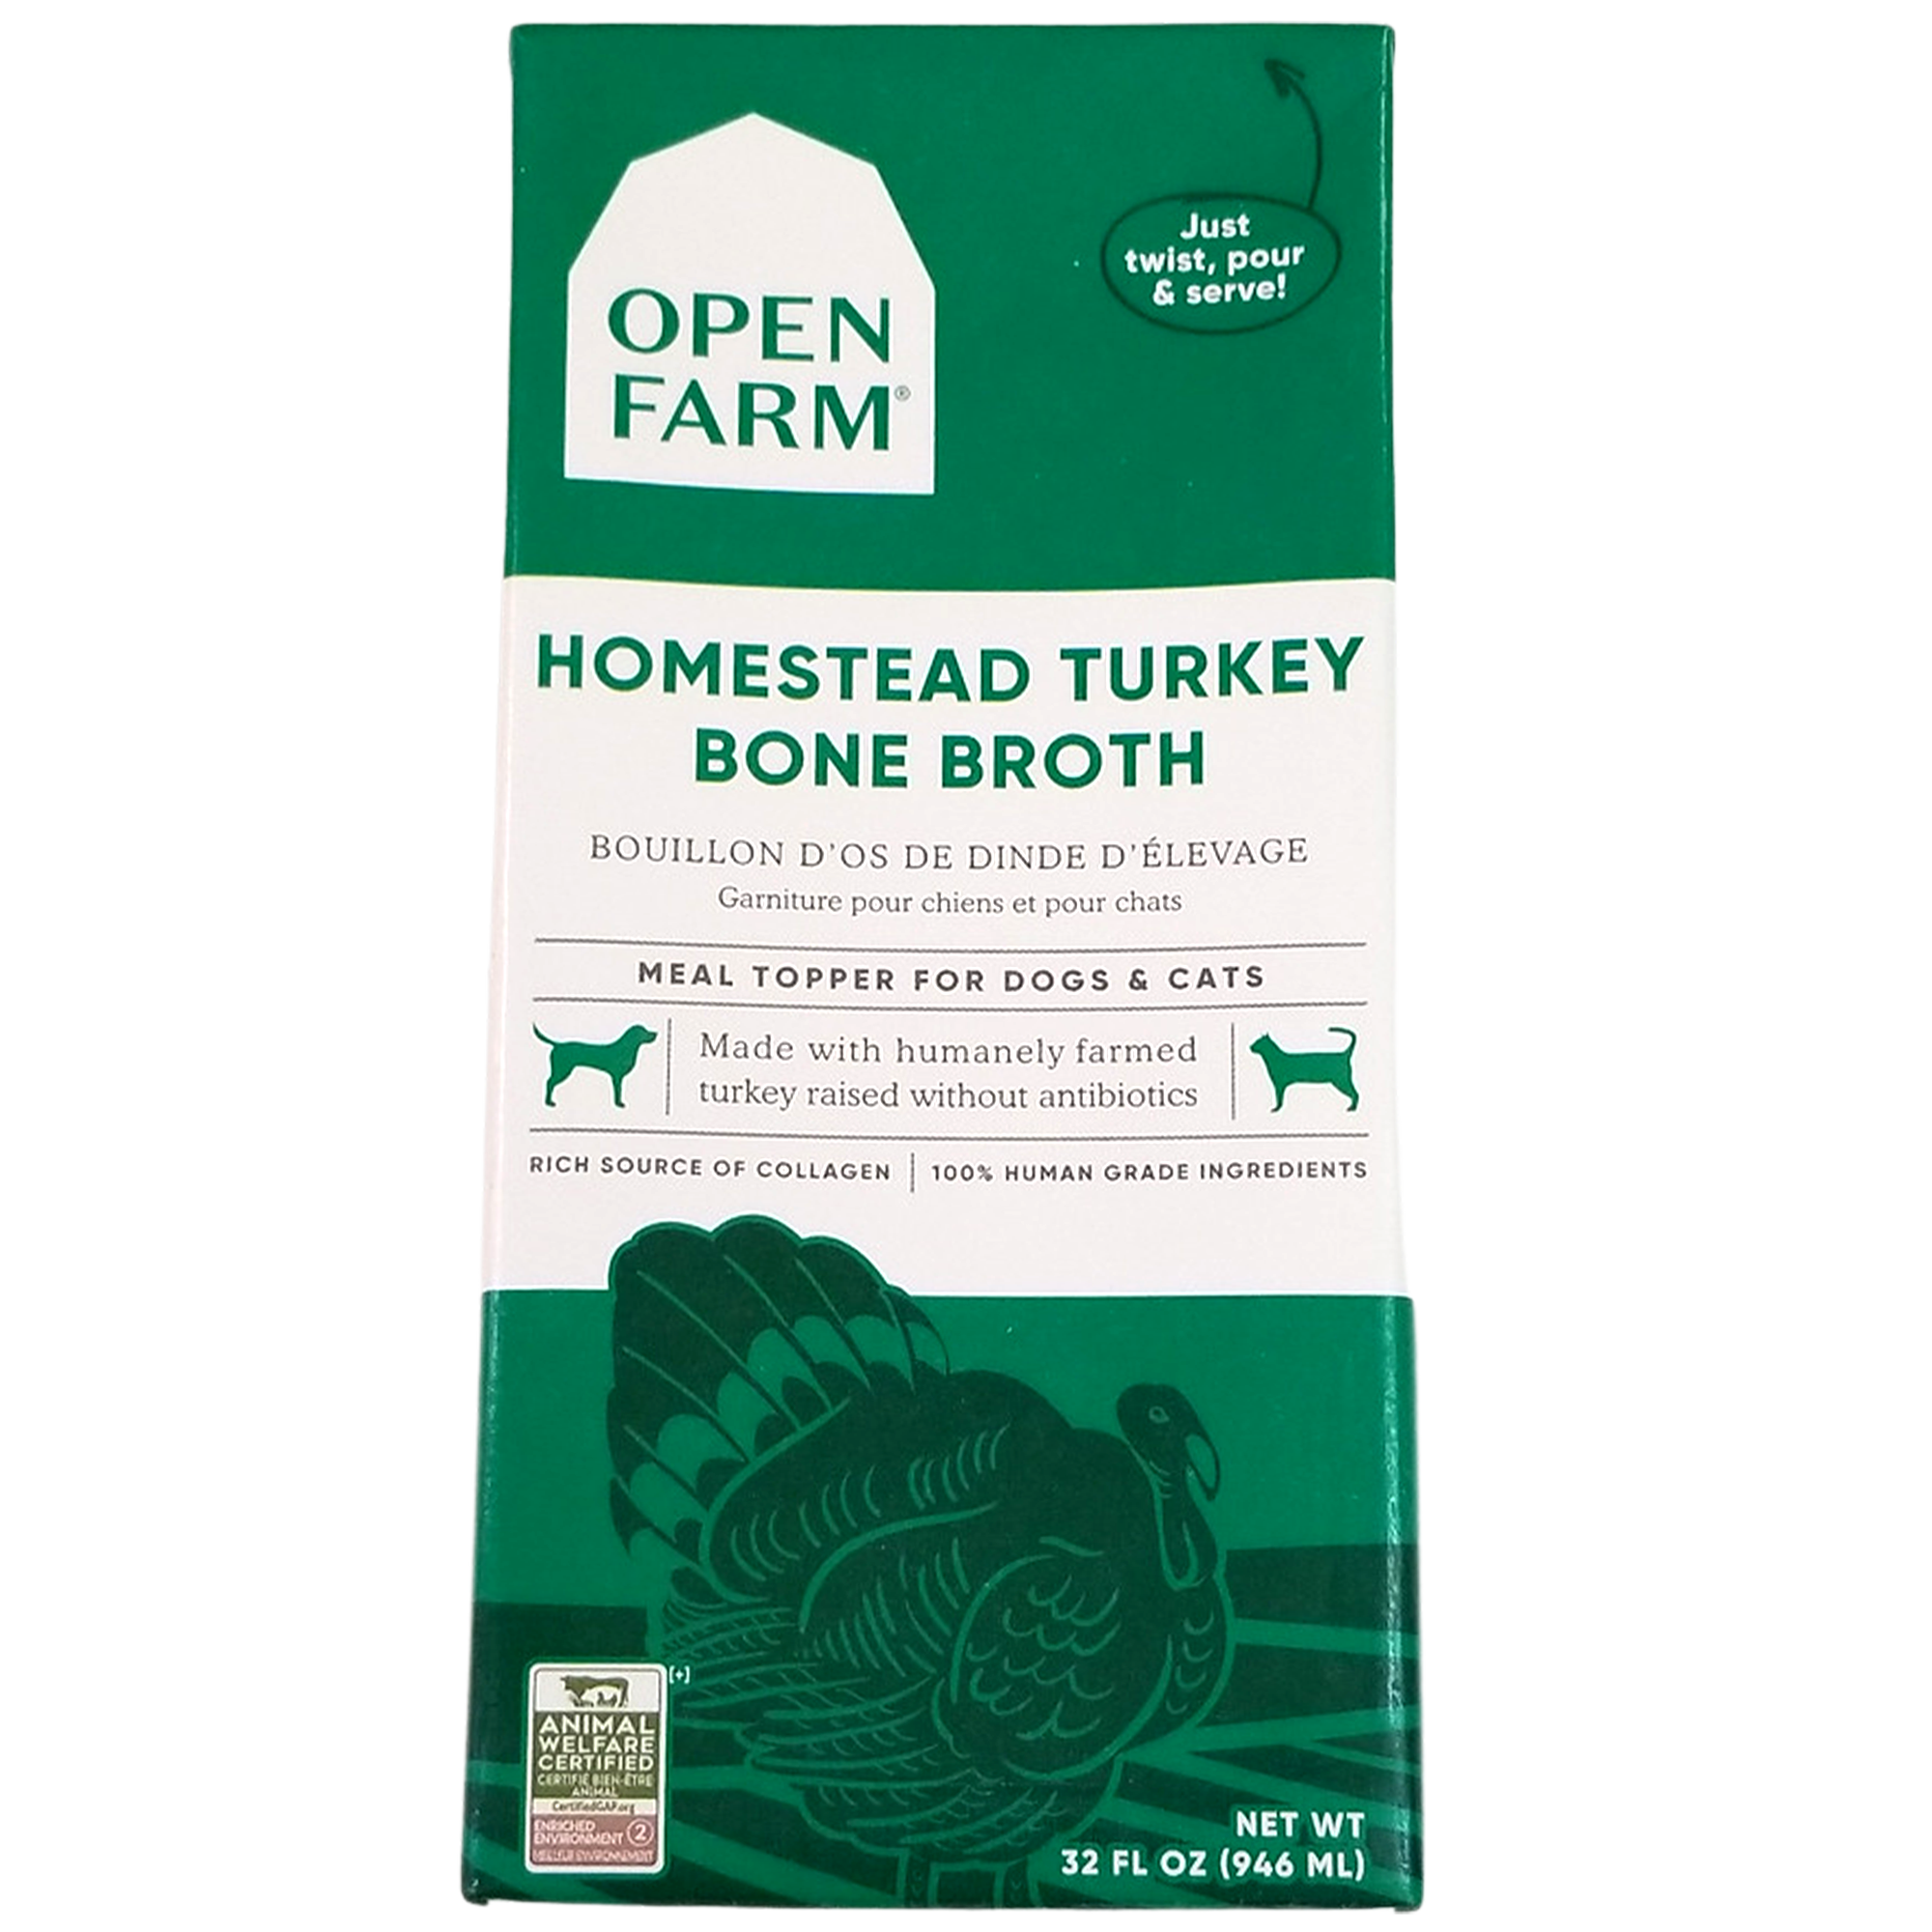 Open Farm Meal Topper for Dogs & Cats, Homestead Turkey Bone Broth, 32oz